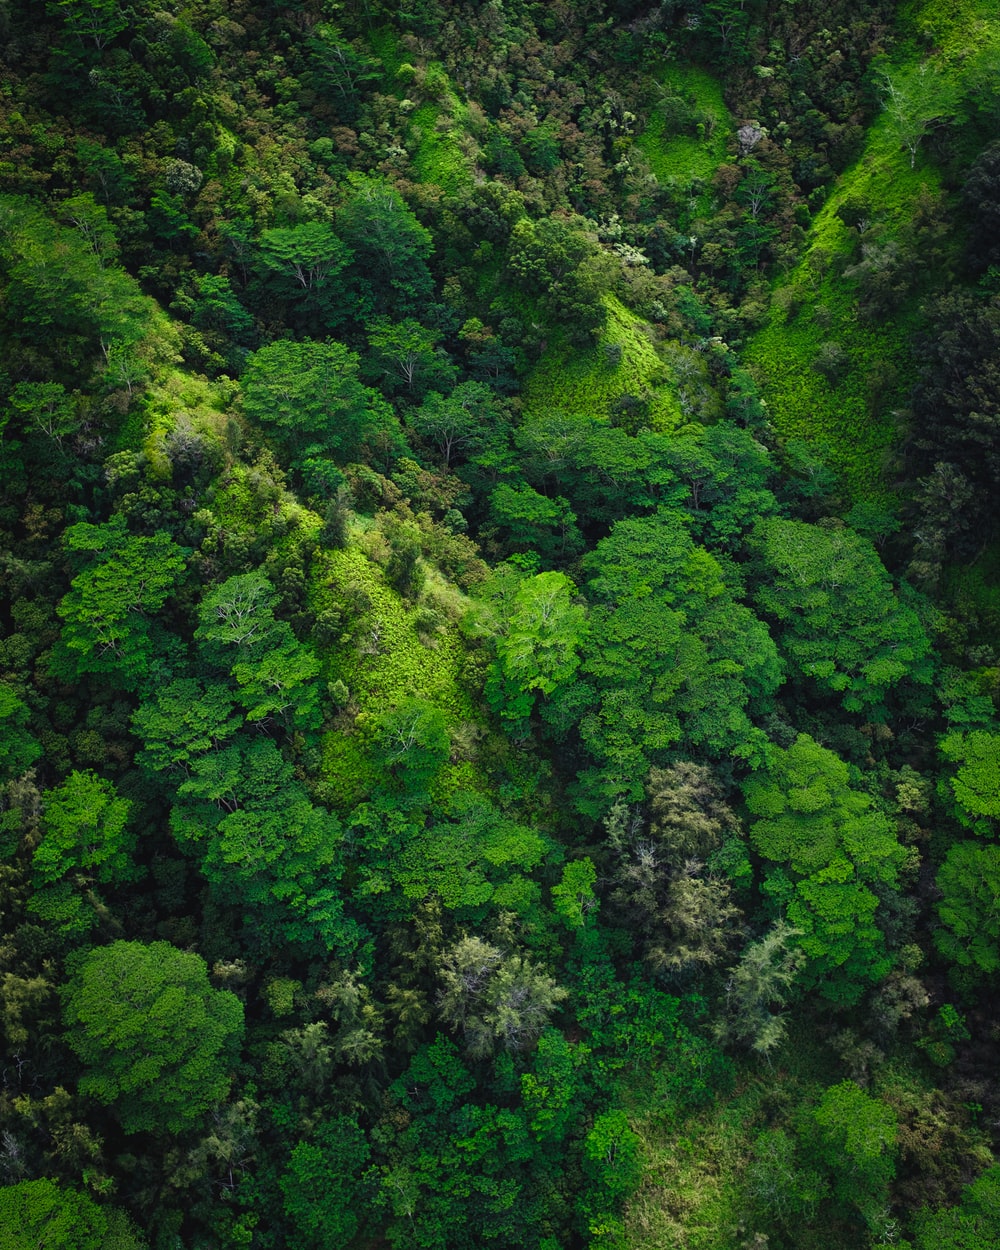 Green Jungle Picture. Download Free Image